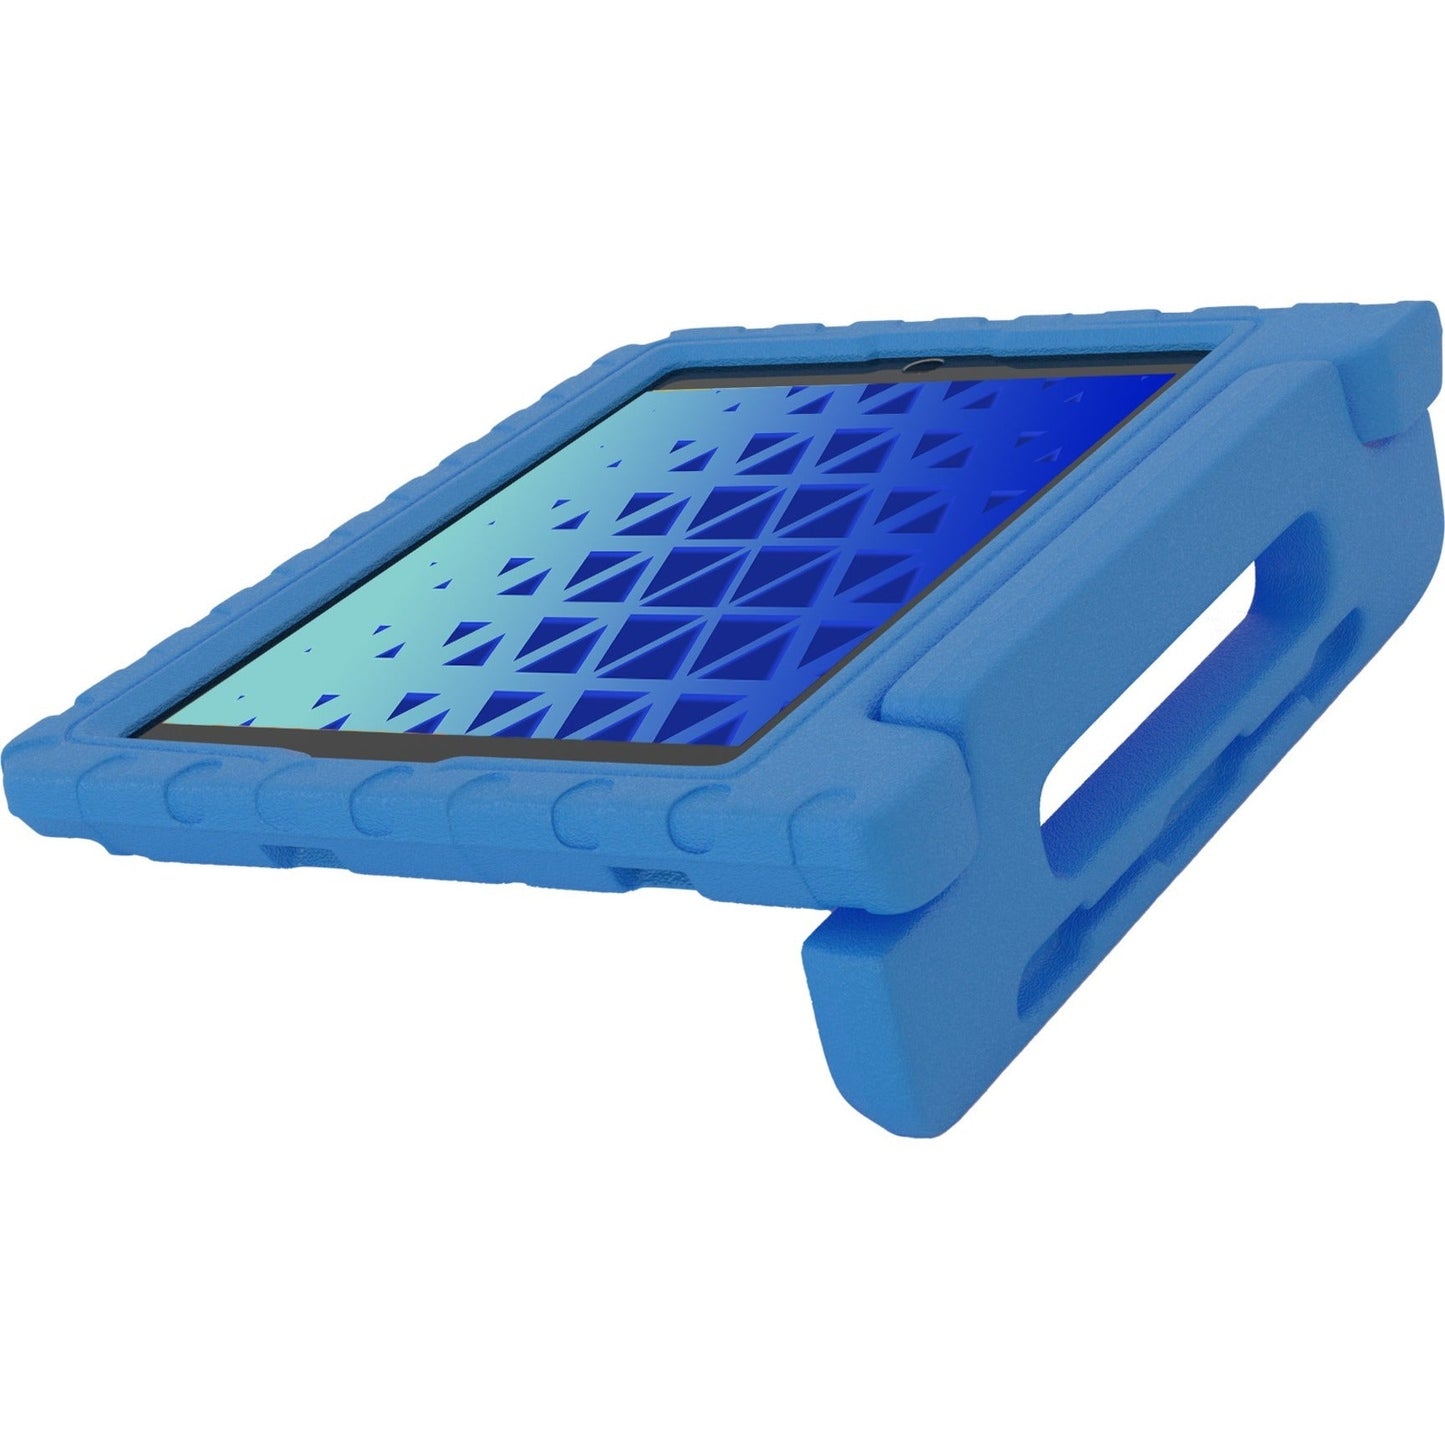 MAXCases Shieldy-K Rugged Carrying Case for 6" Apple iPad mini (6th Generation) Tablet - Blue